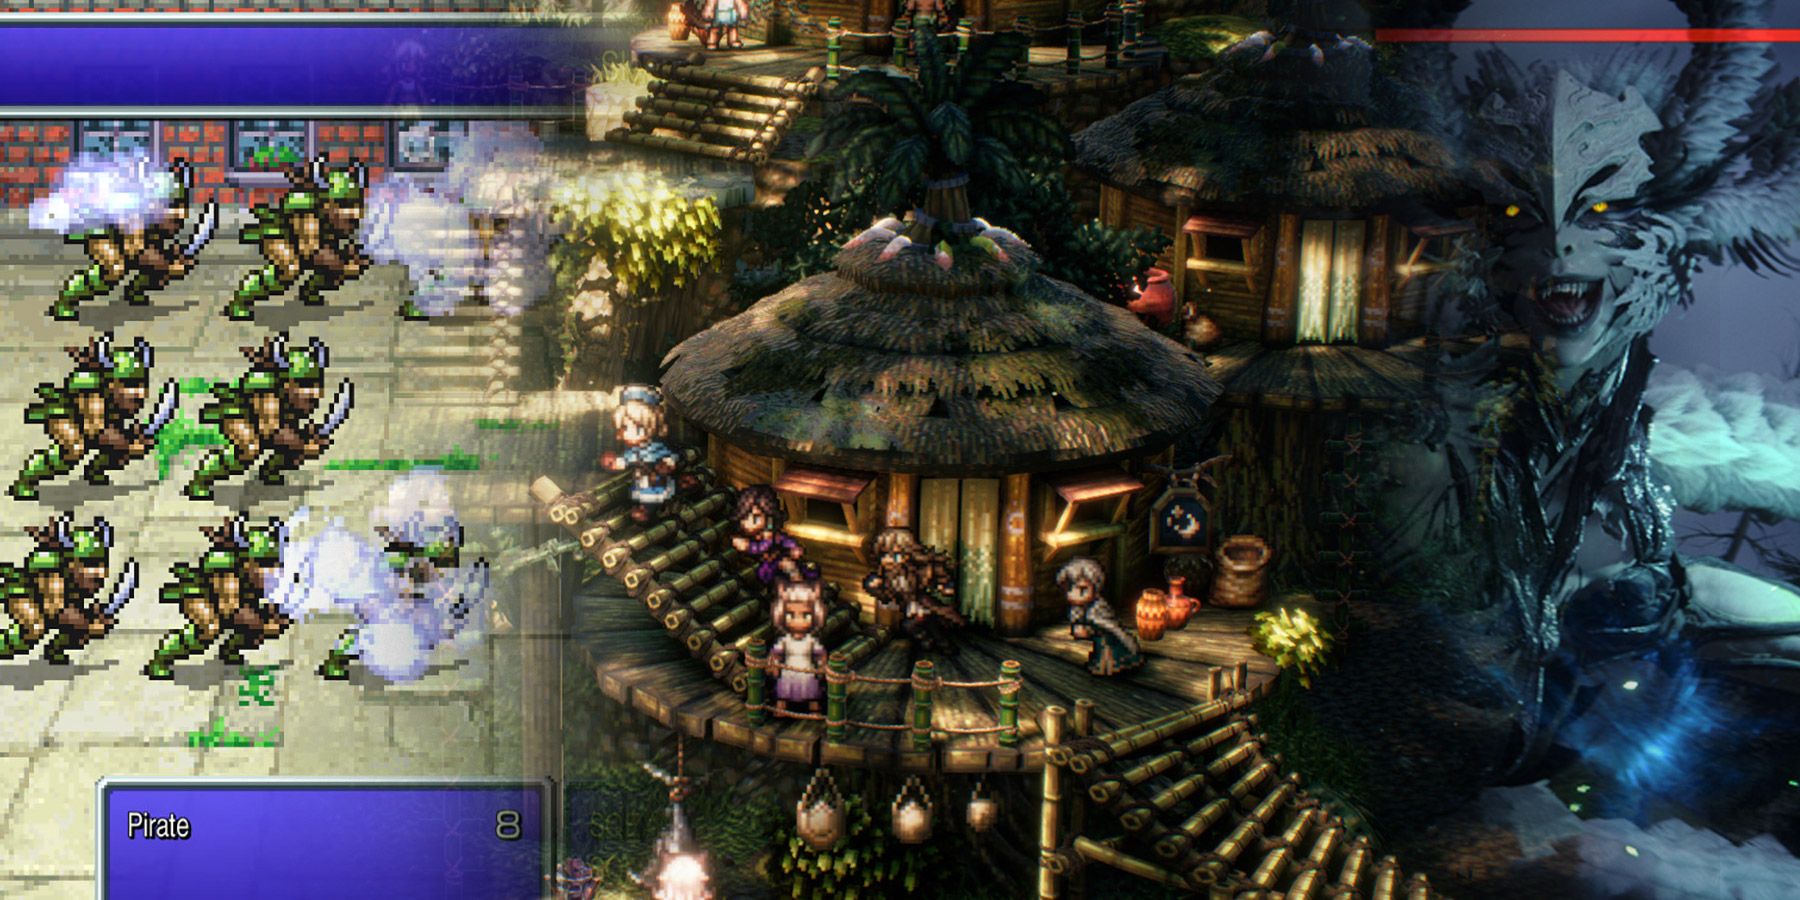 Octopath Traveler review: a modern take on classic Final Fantasy